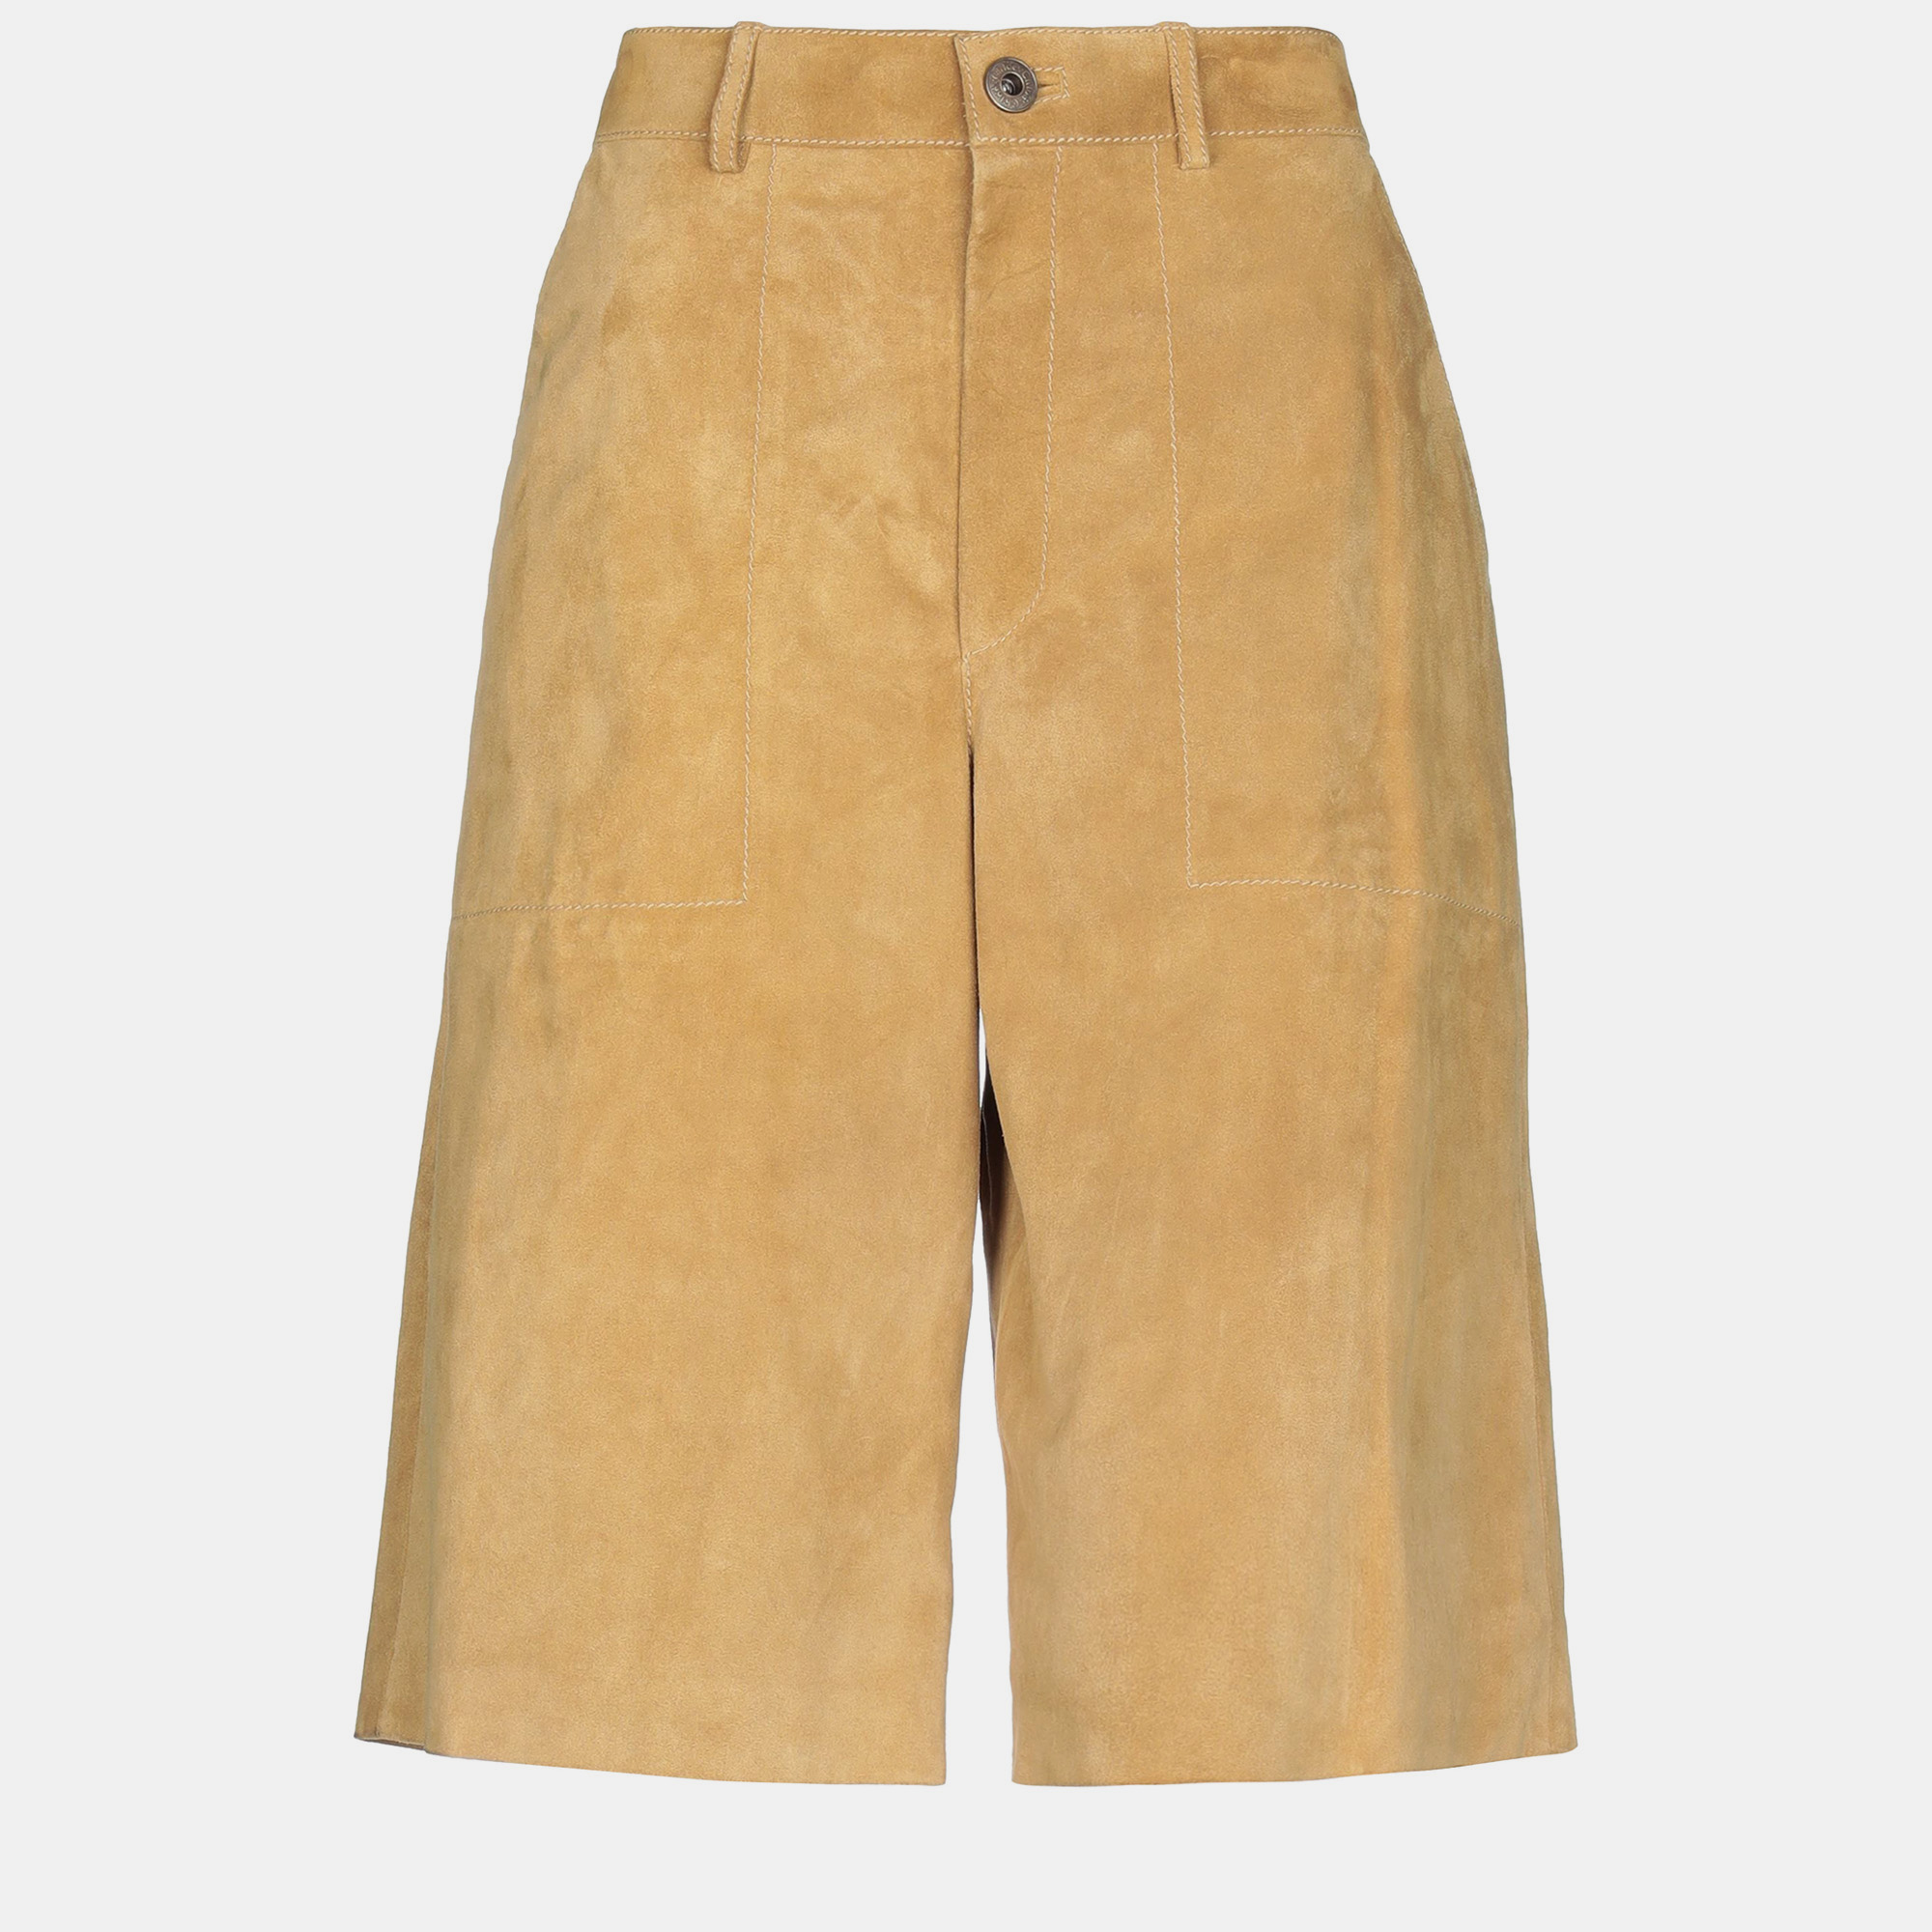 Pre-owned Chloé Mustard Yellow Suede Bermuda Shorts S (fr 34)